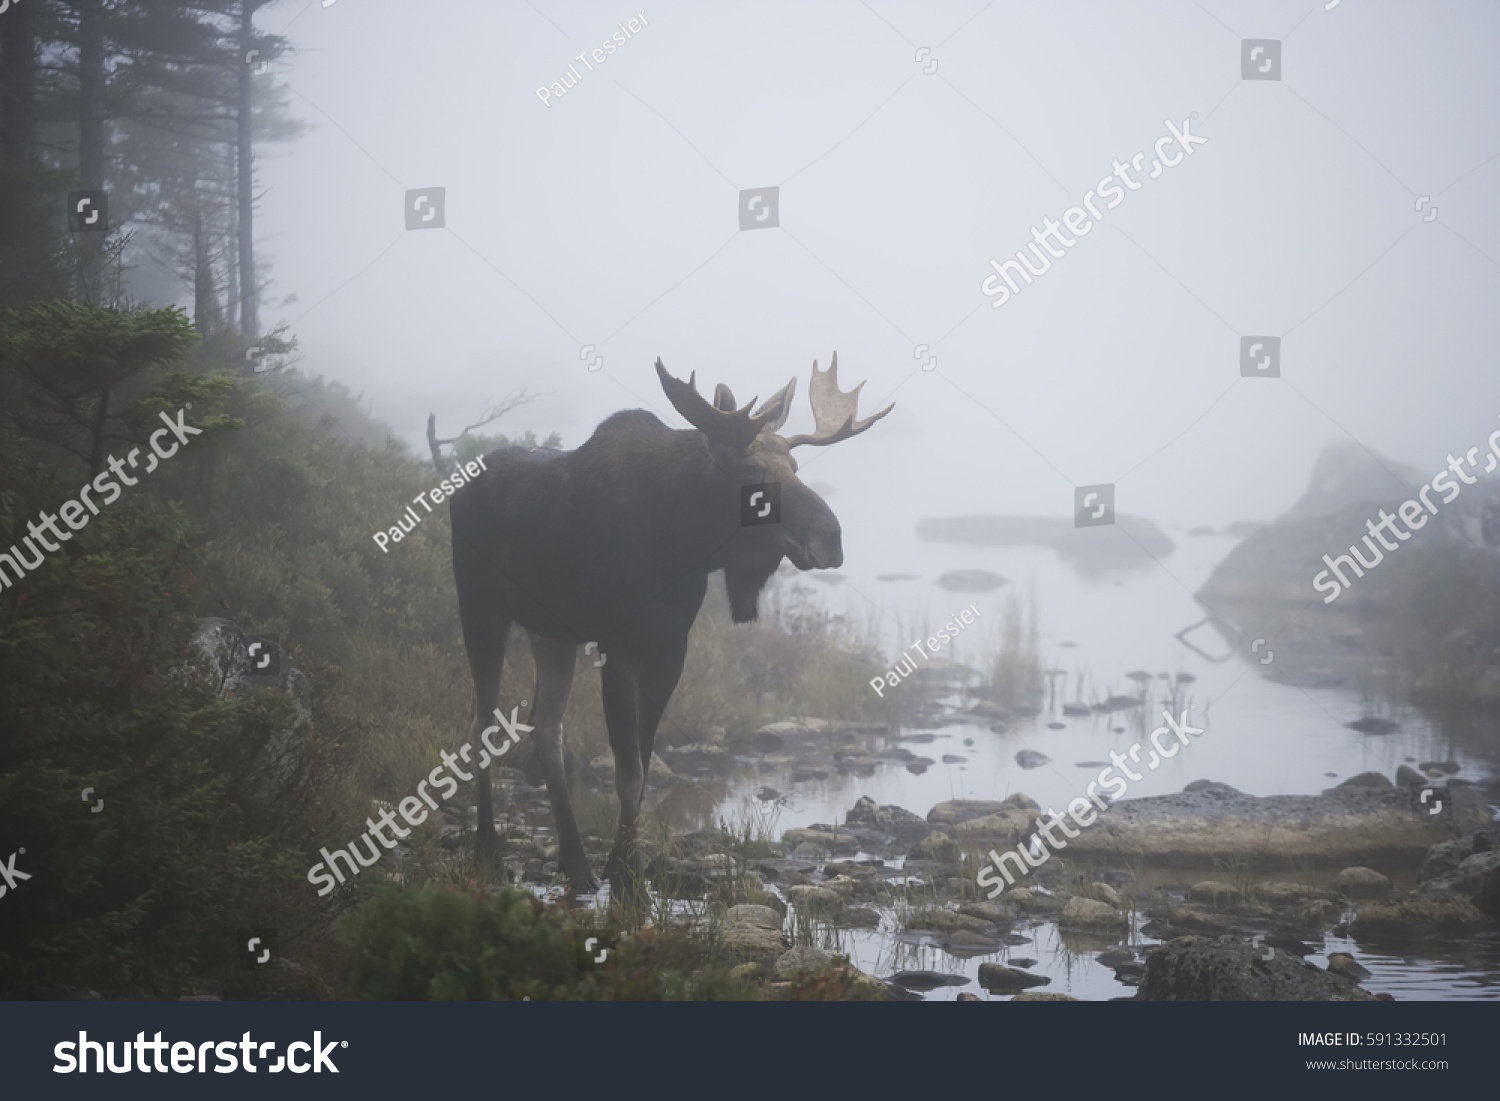 A bull moose in the fog.
This moose is wild and free and has been photographed in its natural habitat. #591332501